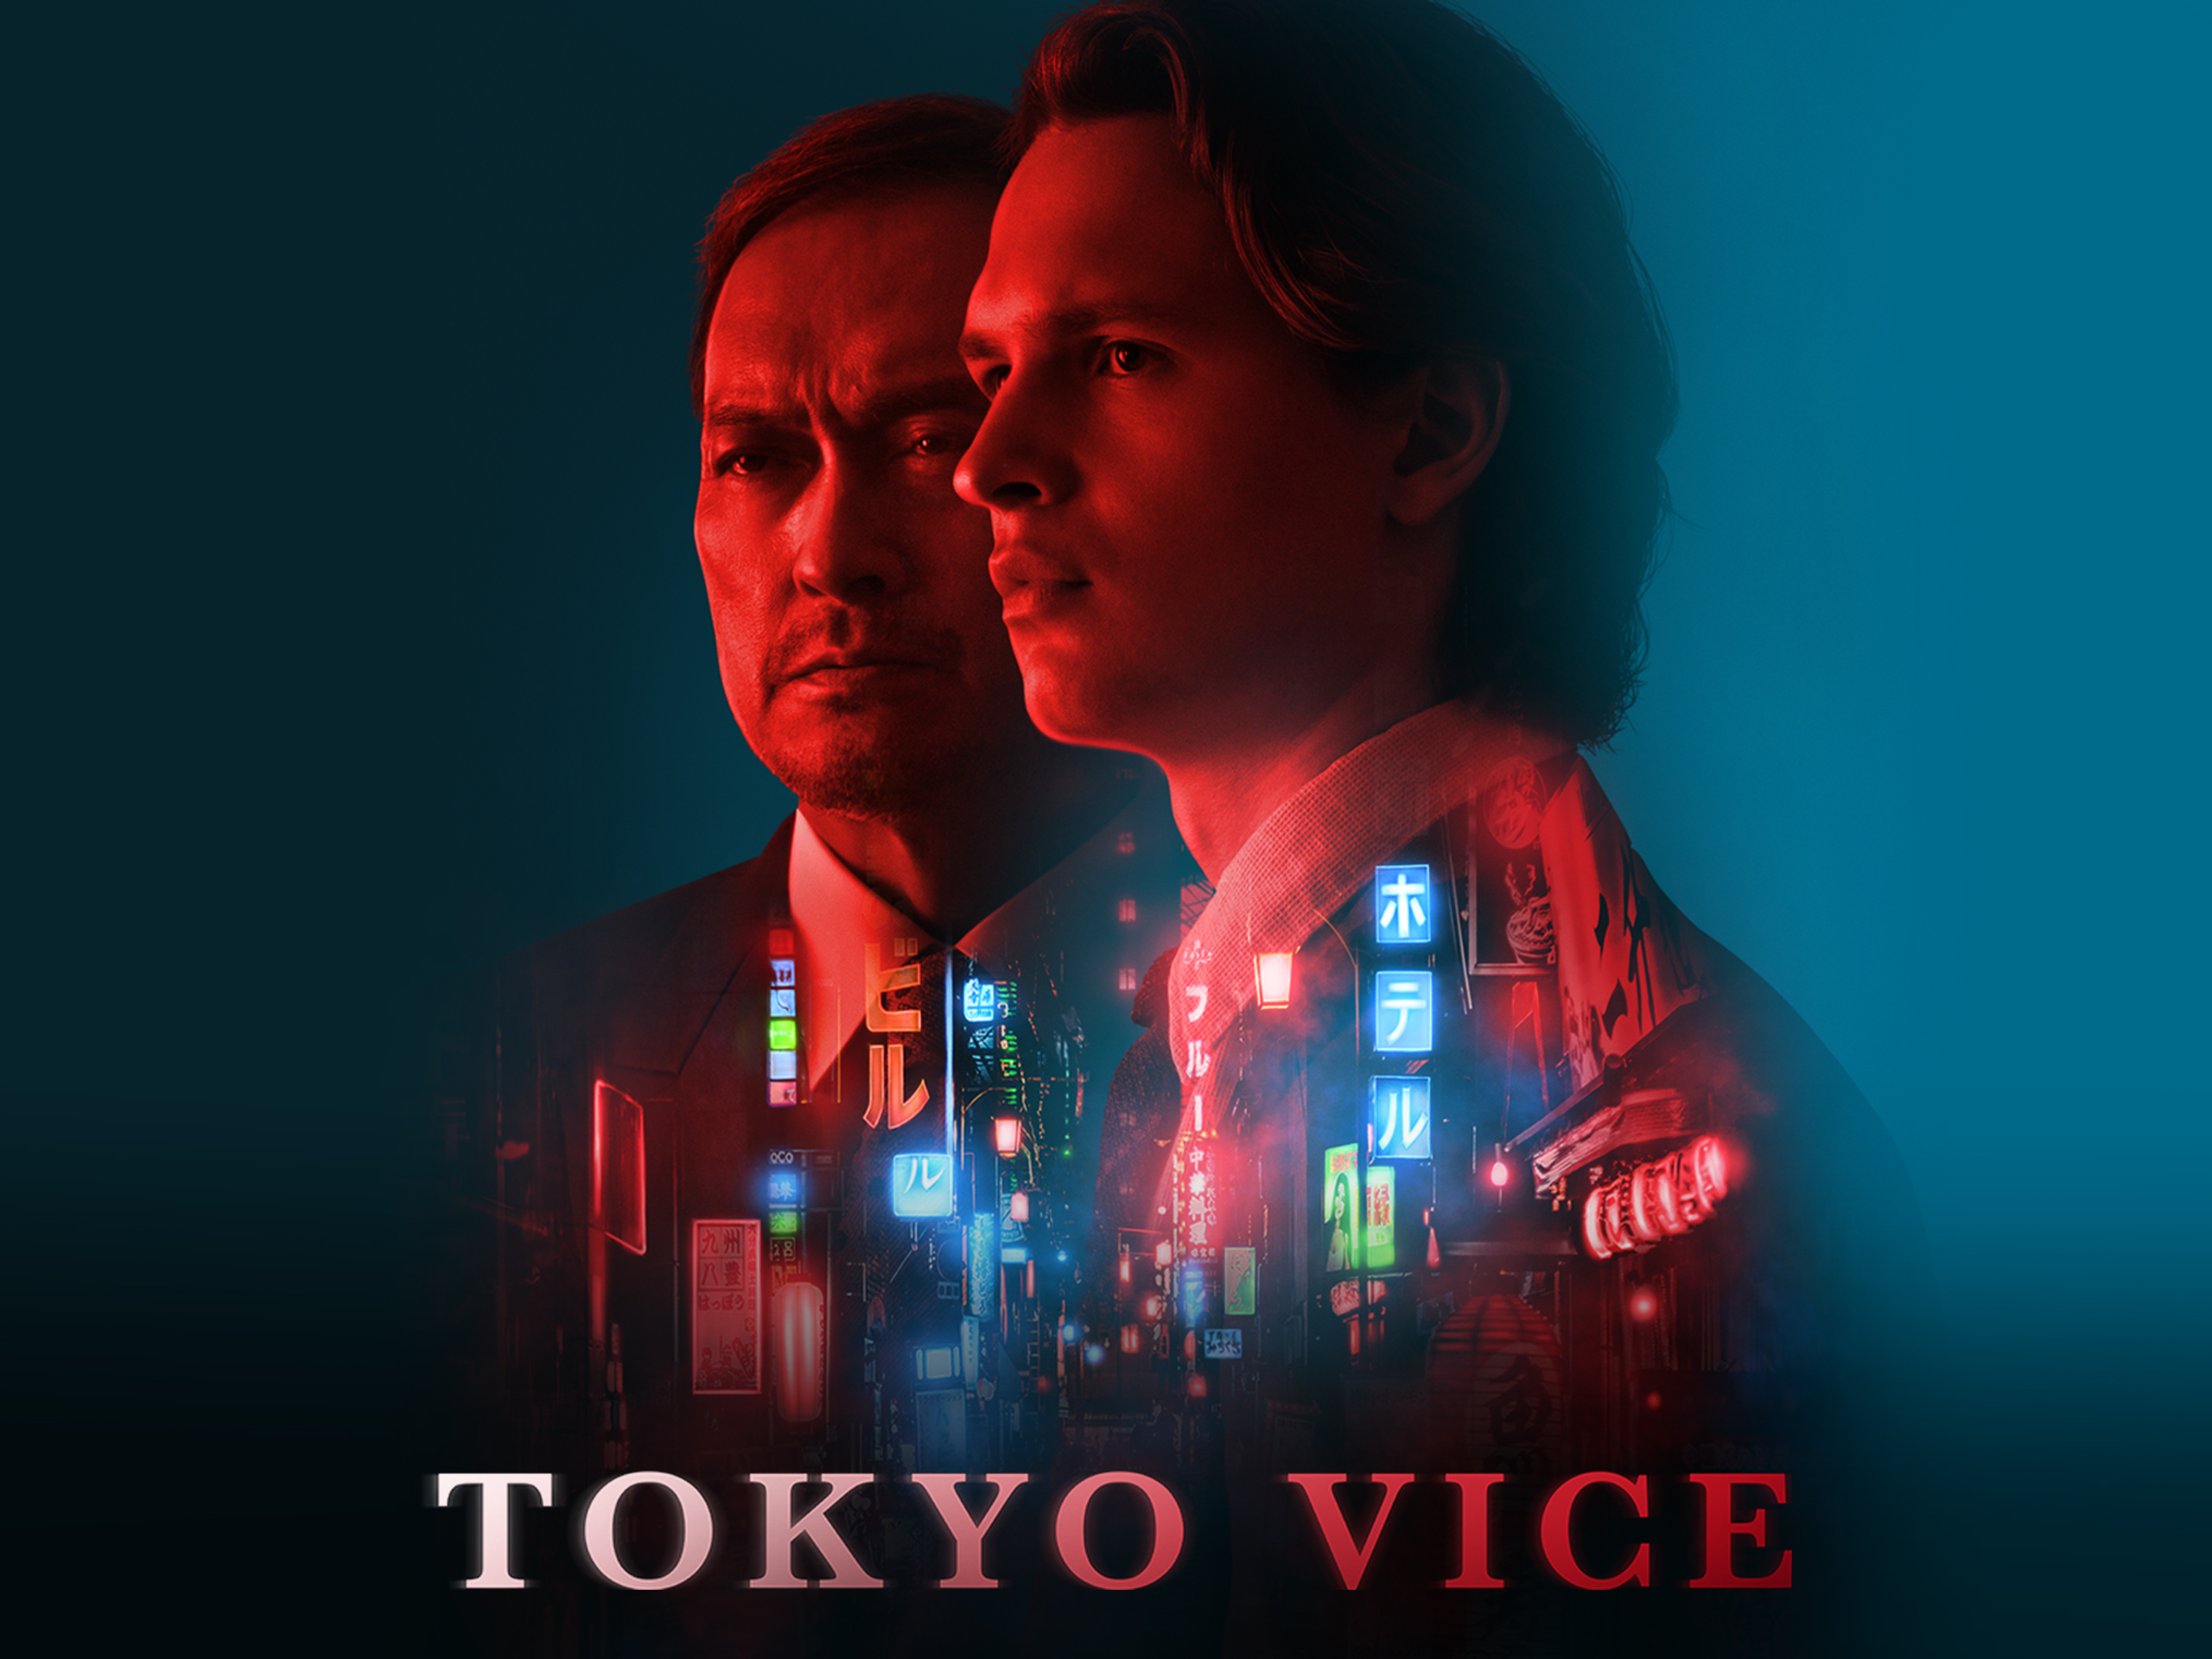 Media Corner: A Review of Tokyo Vice